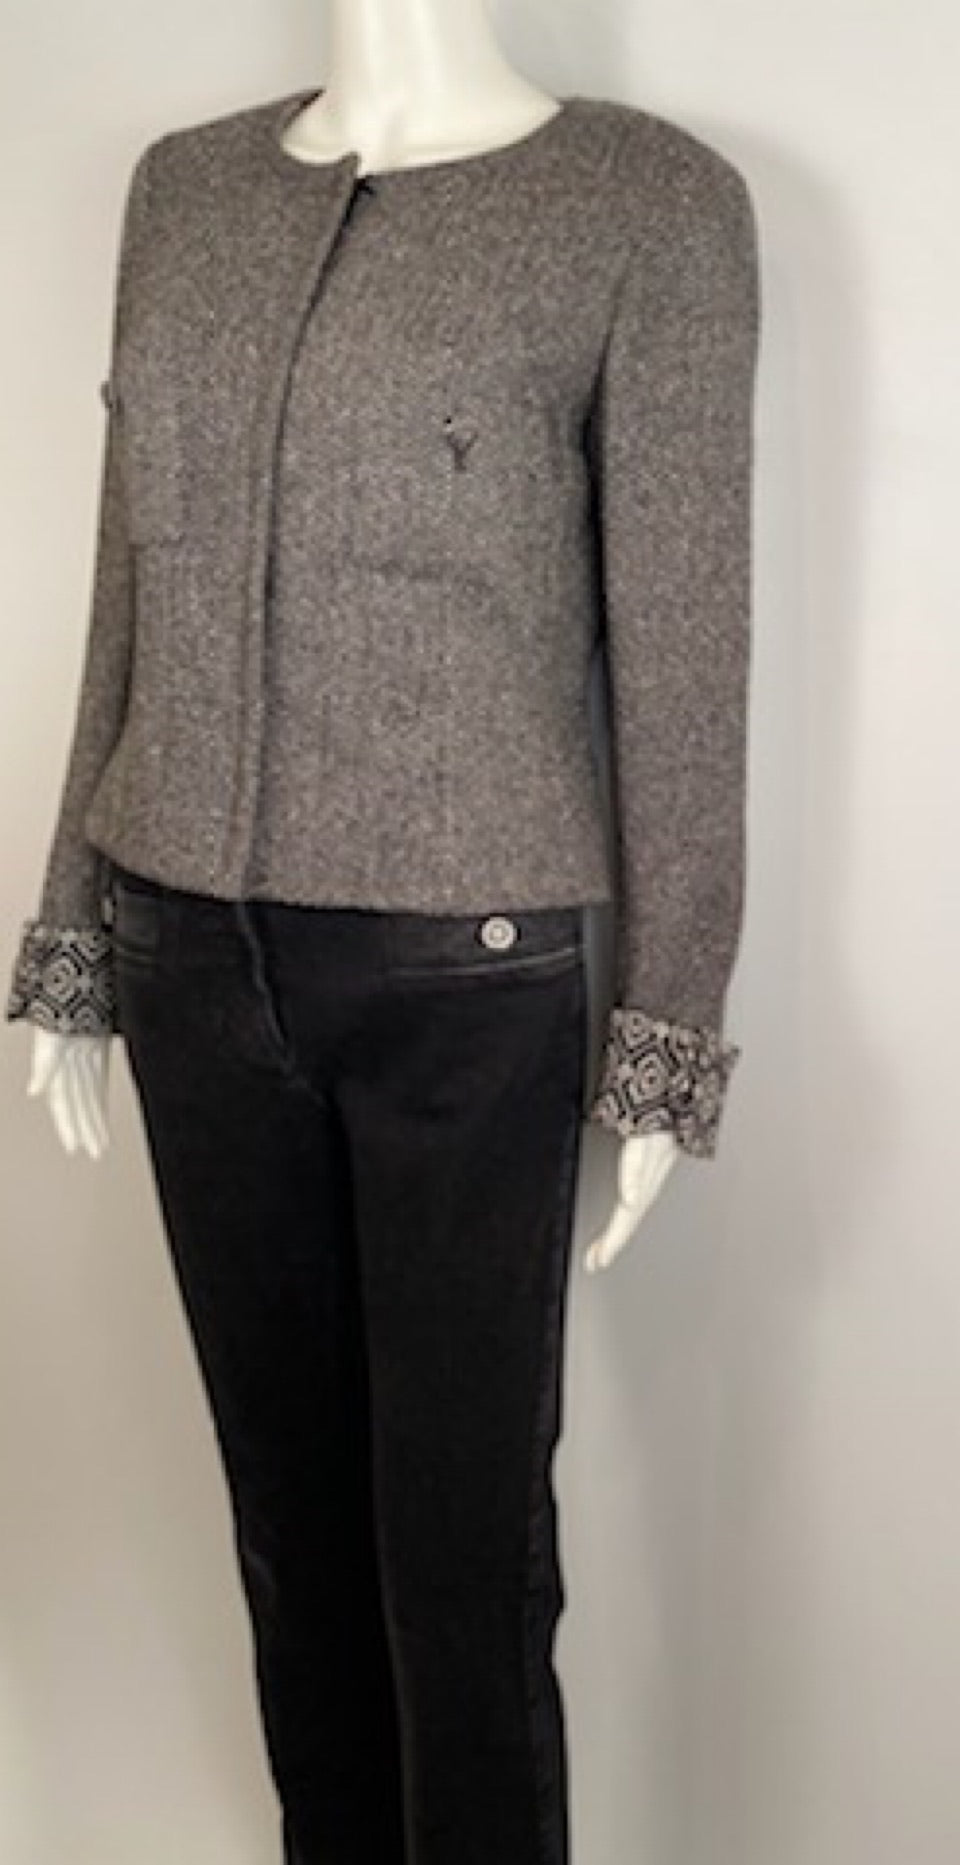 HelensChanel Chanel 08A 2008 Fall Collarless Herringbone Jacket with Removable Cuffs FR 40 US 4